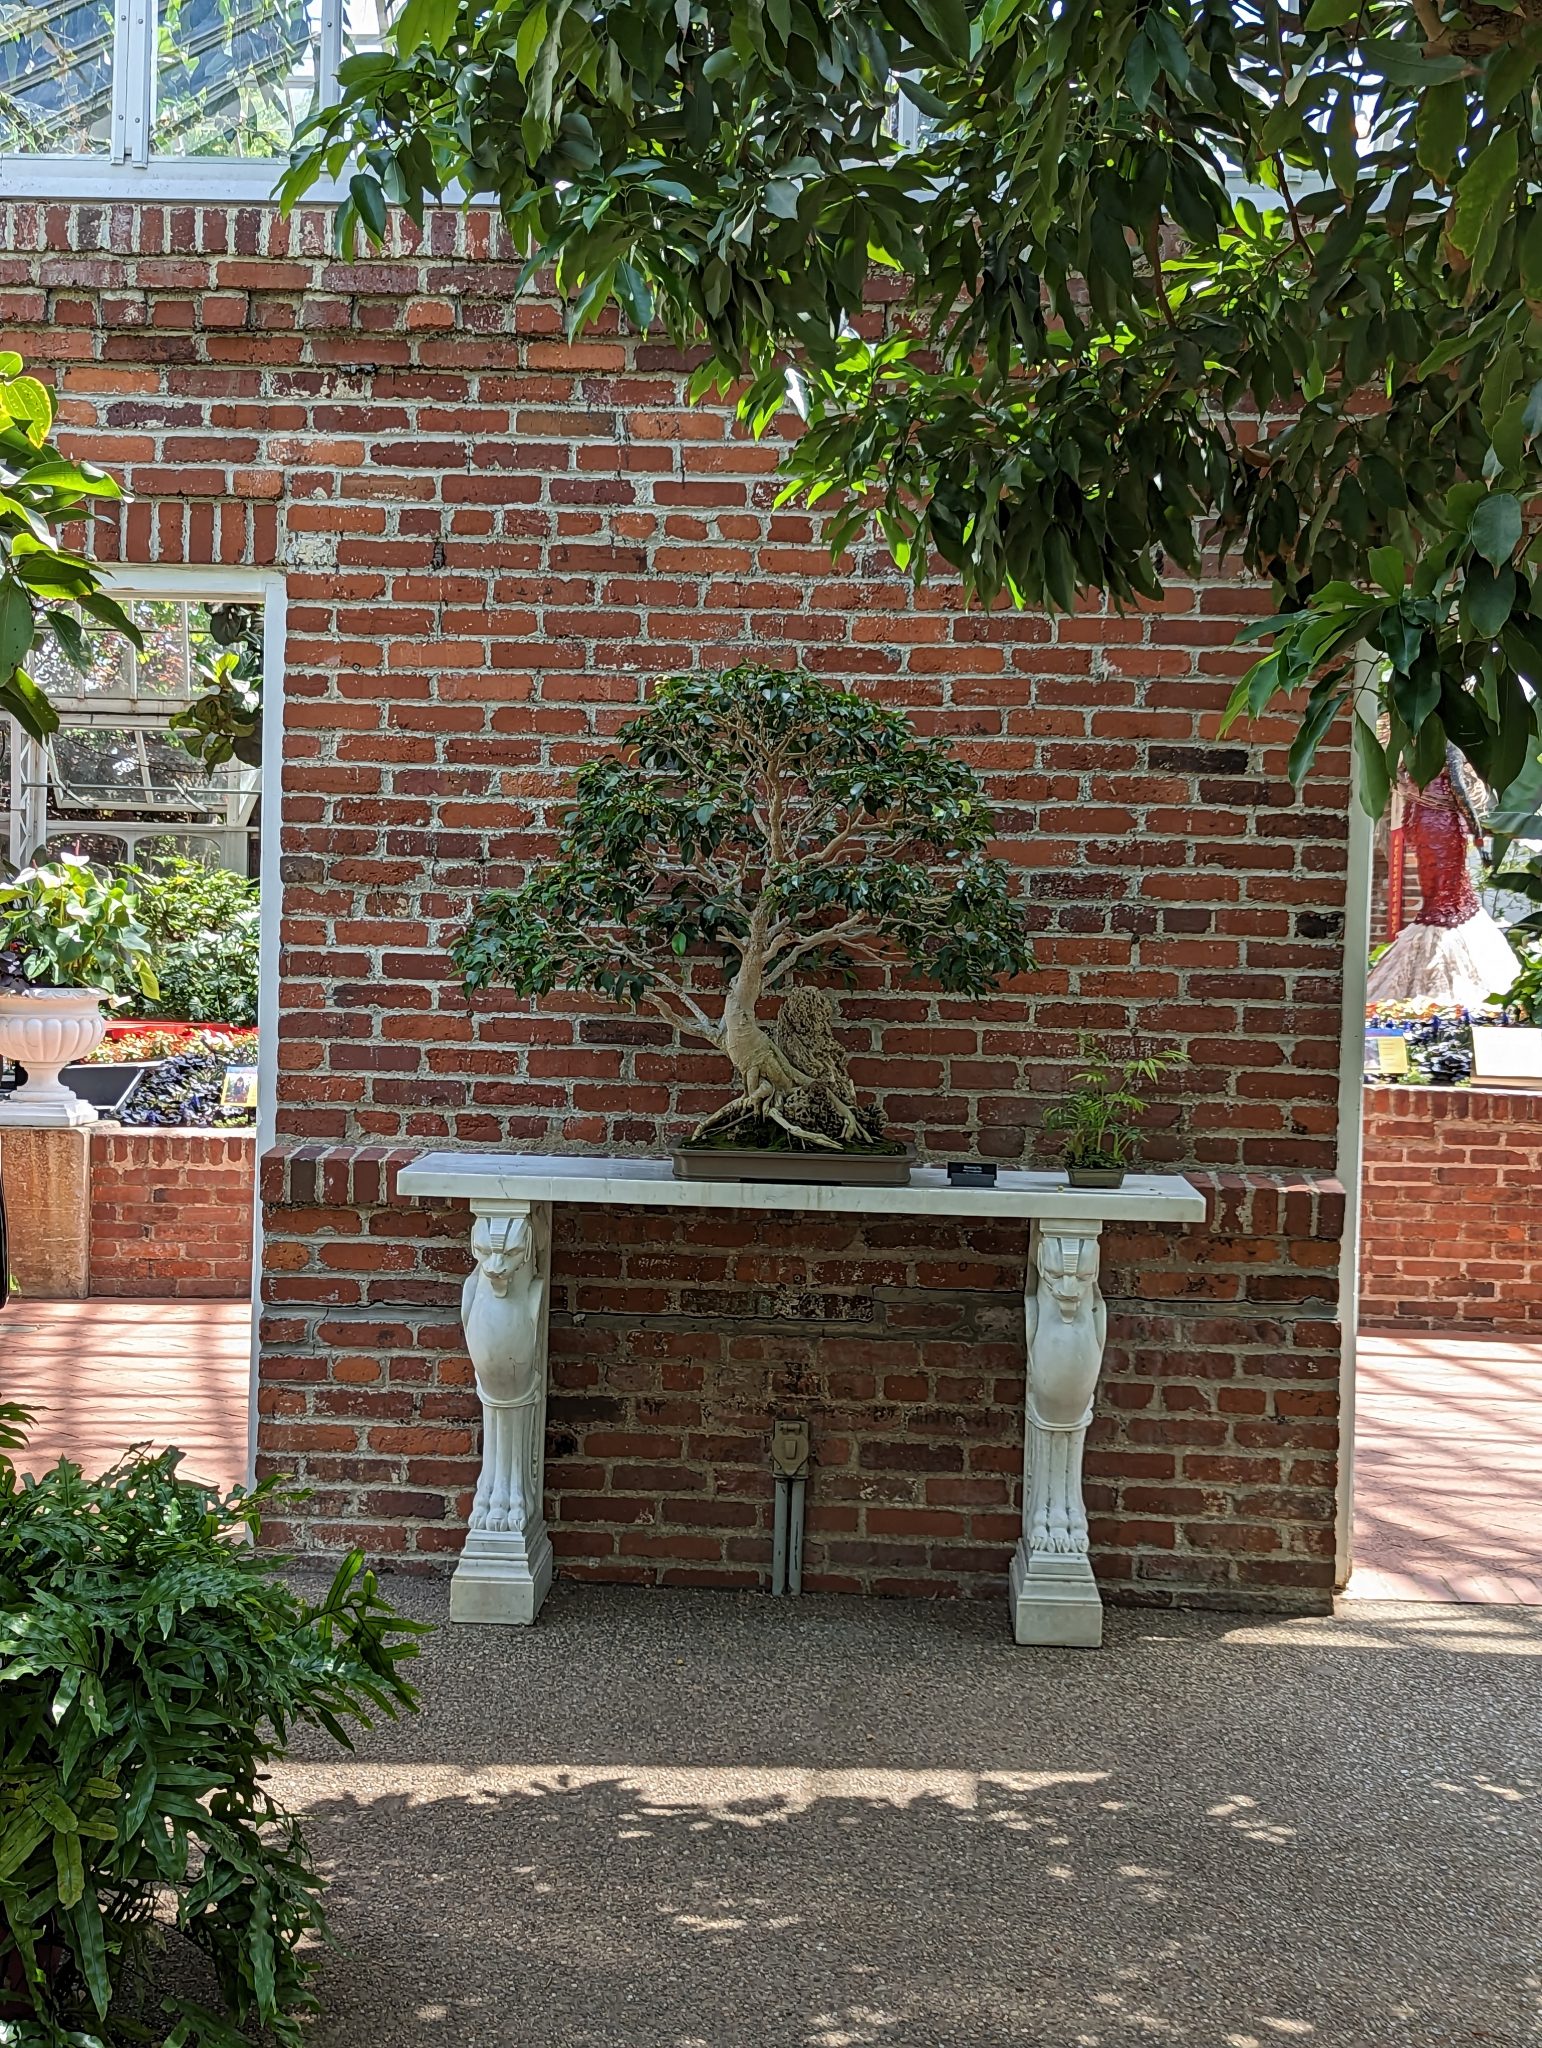 A bonsai tree in front of a brick wall inside a greenhouse